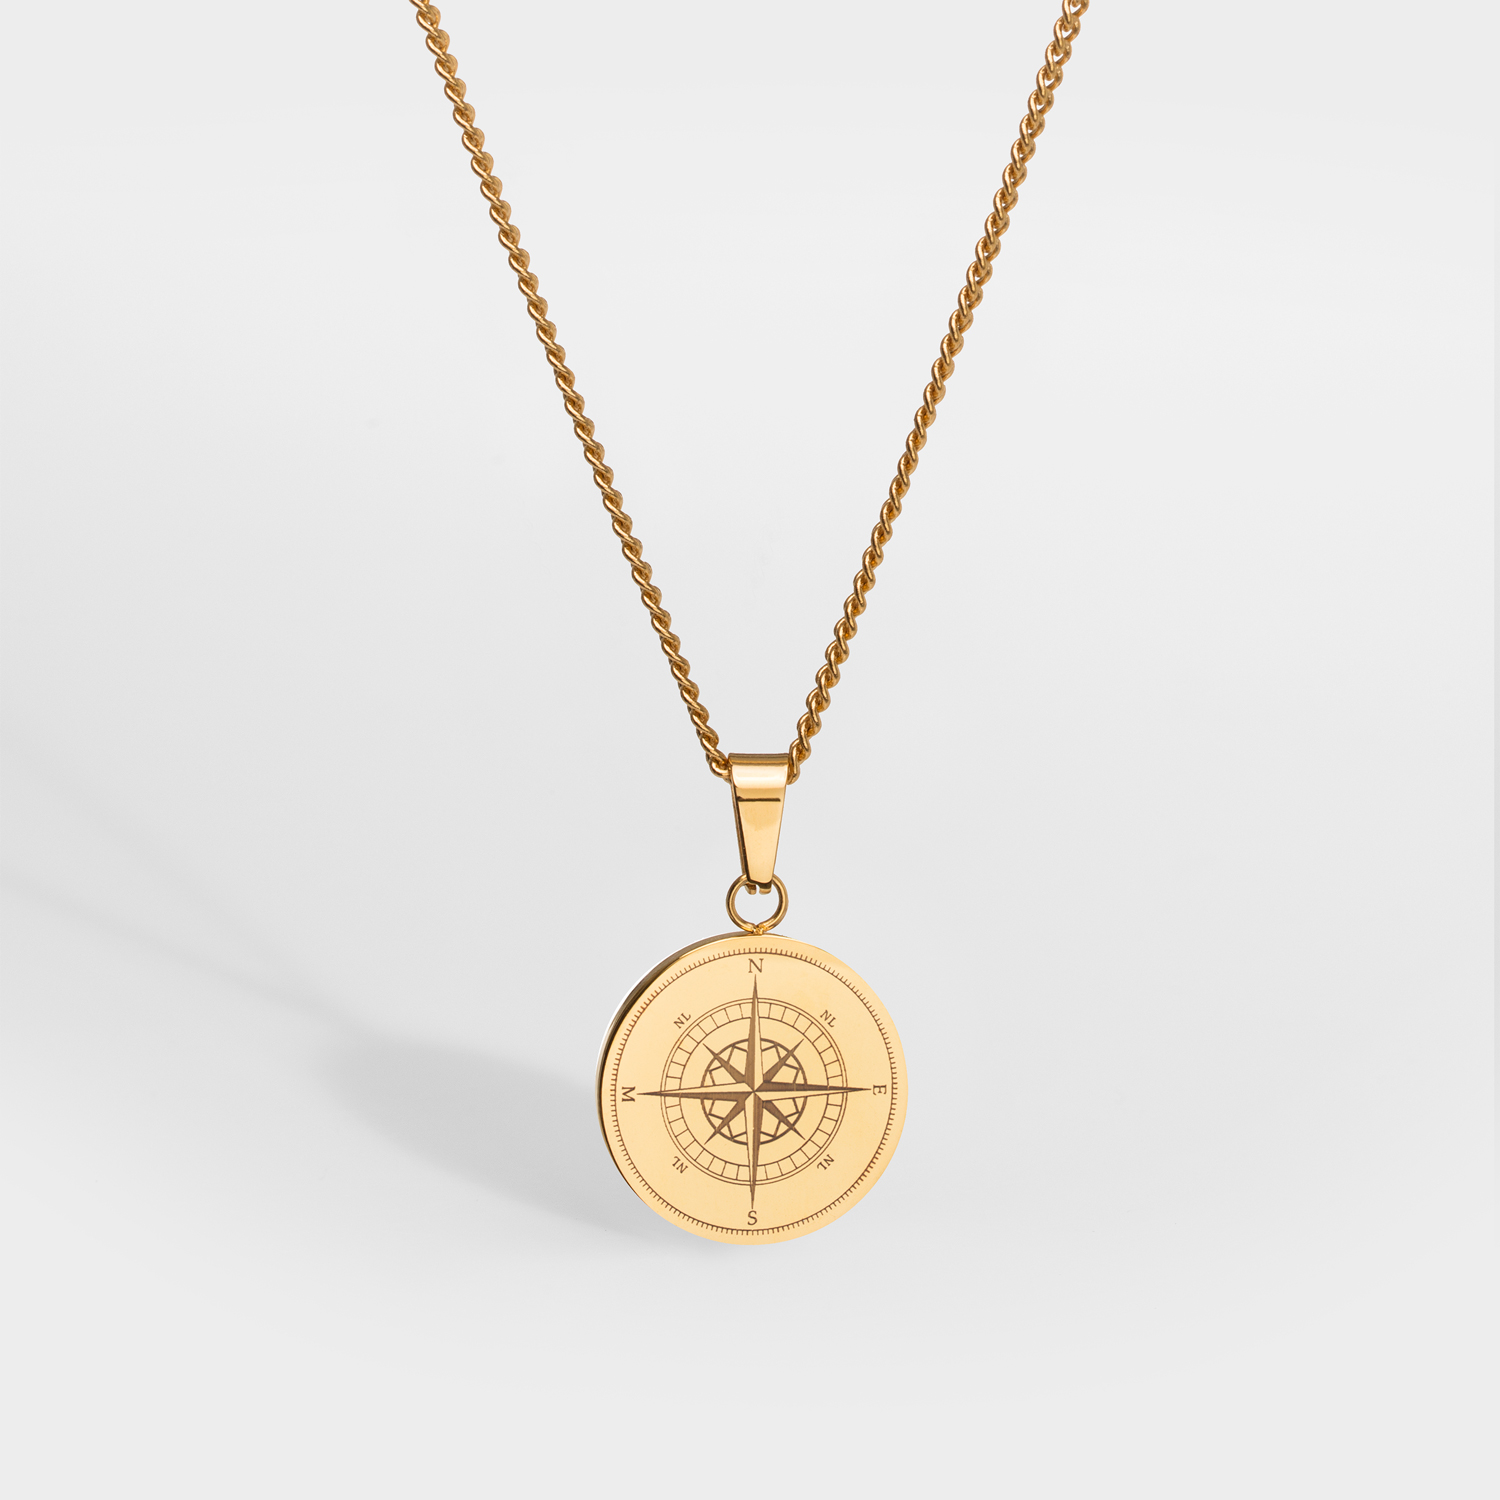 Gold Stainless Steel Compass North Star Necklace Compass Jewelry Cross Crucifix Compass Length : 45cm, Metal Color : Gold Compass 